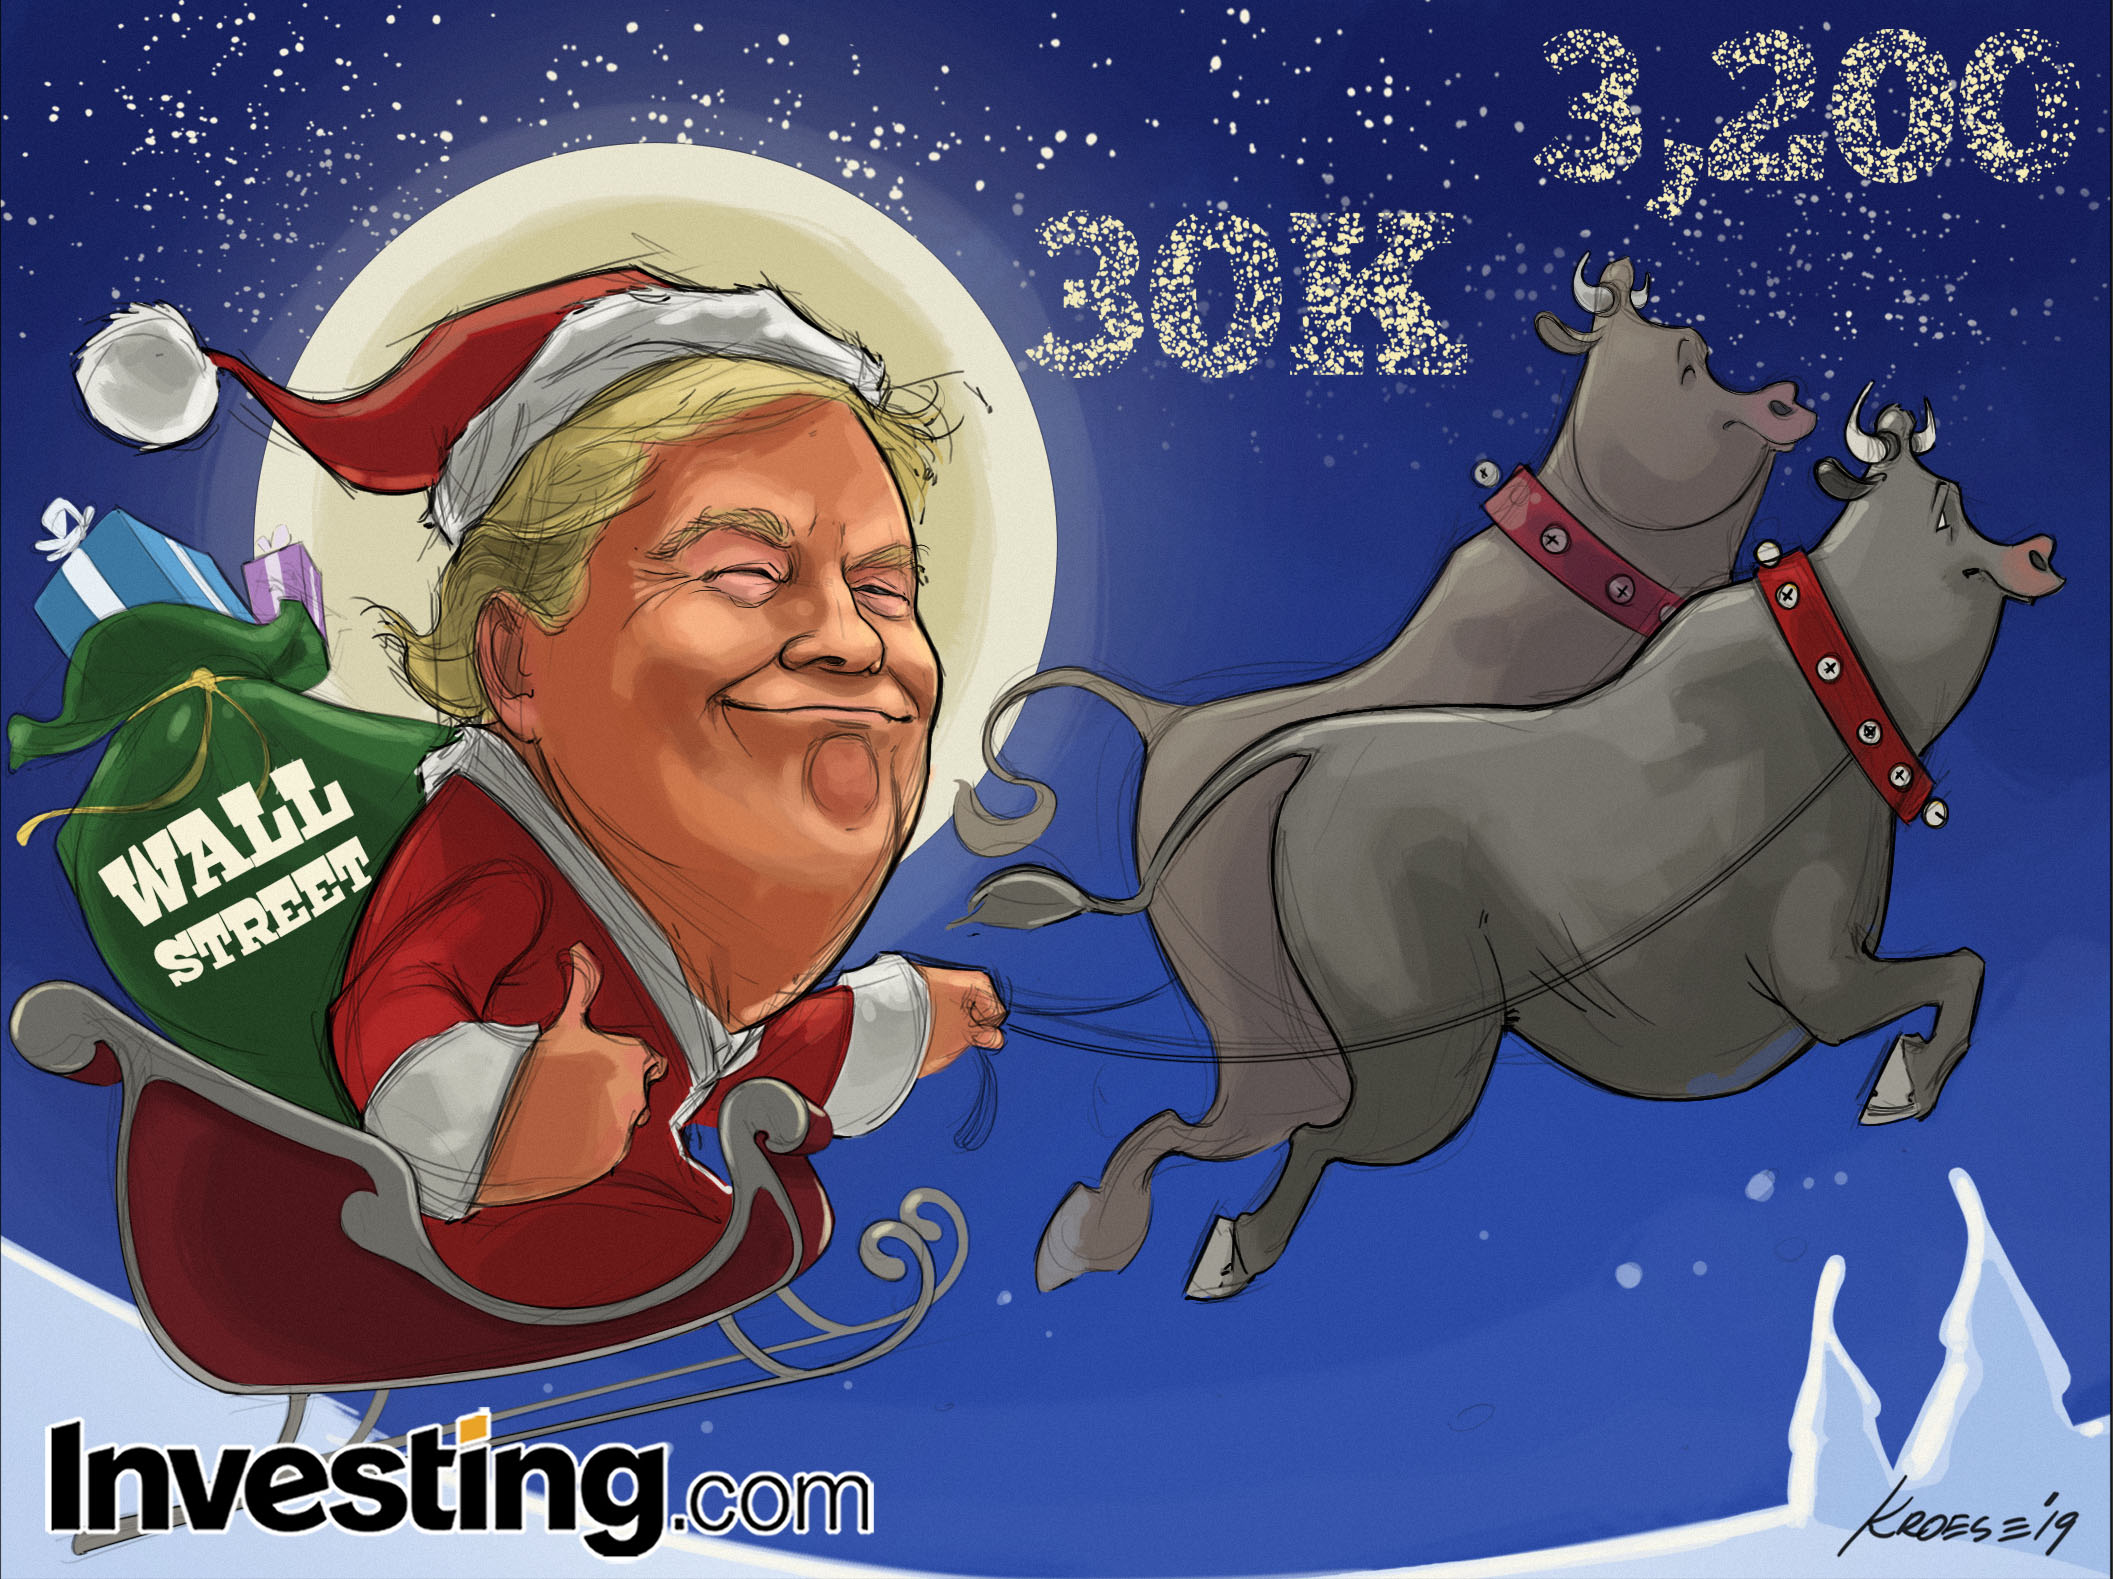 Merry Christmas Wall St. As Indices Push Higher